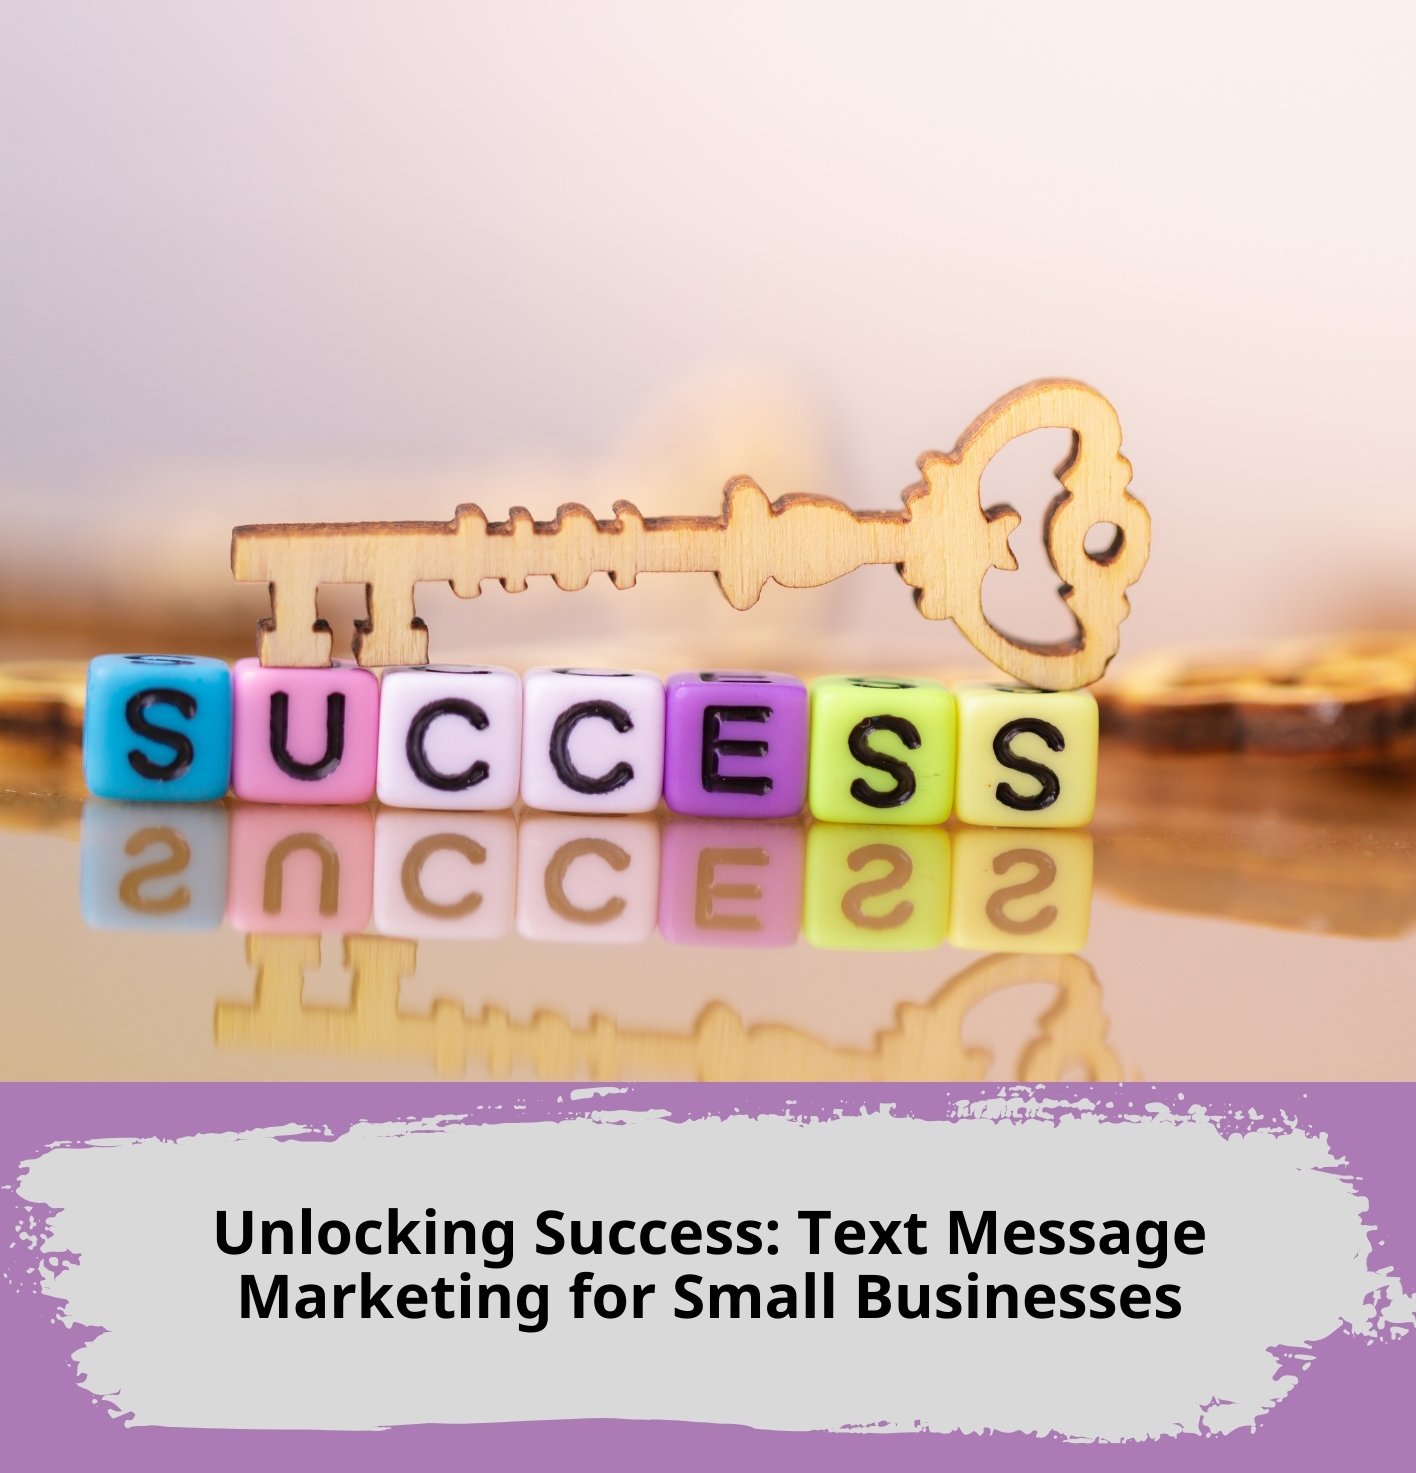 Unlocking Success: Text Message Marketing for Small Businesses